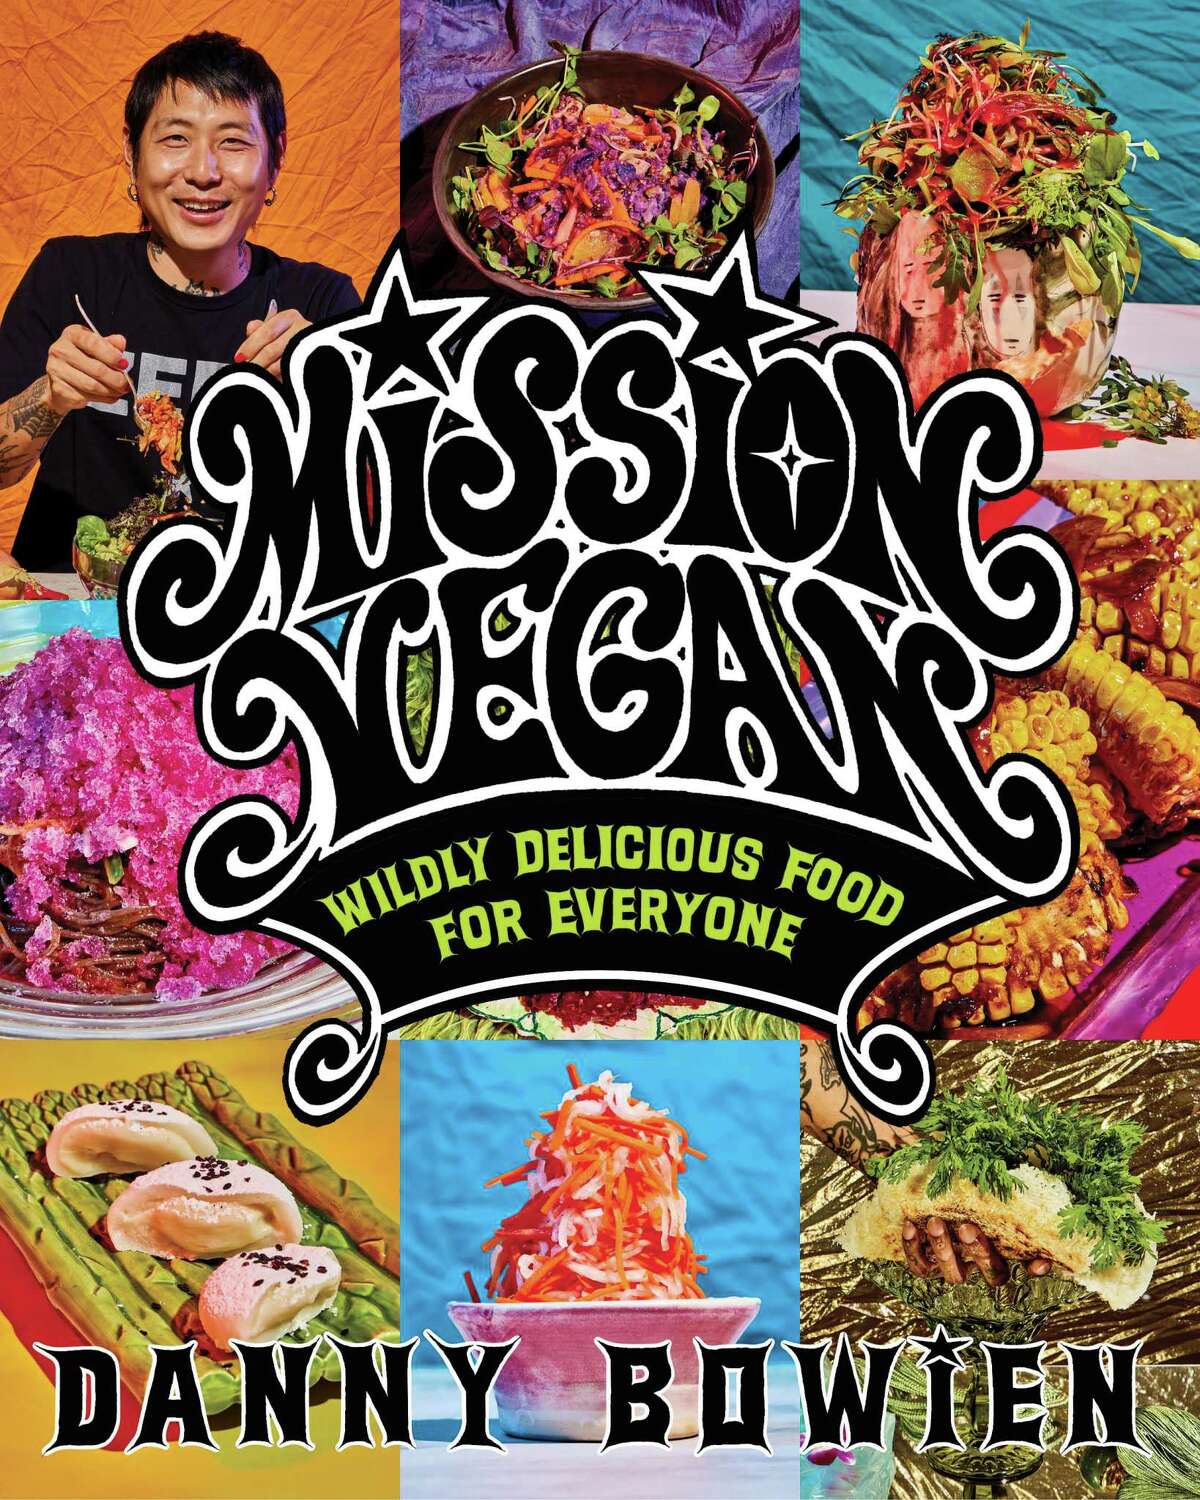 The cover of "Mission Vegan" by Danny Bowien.